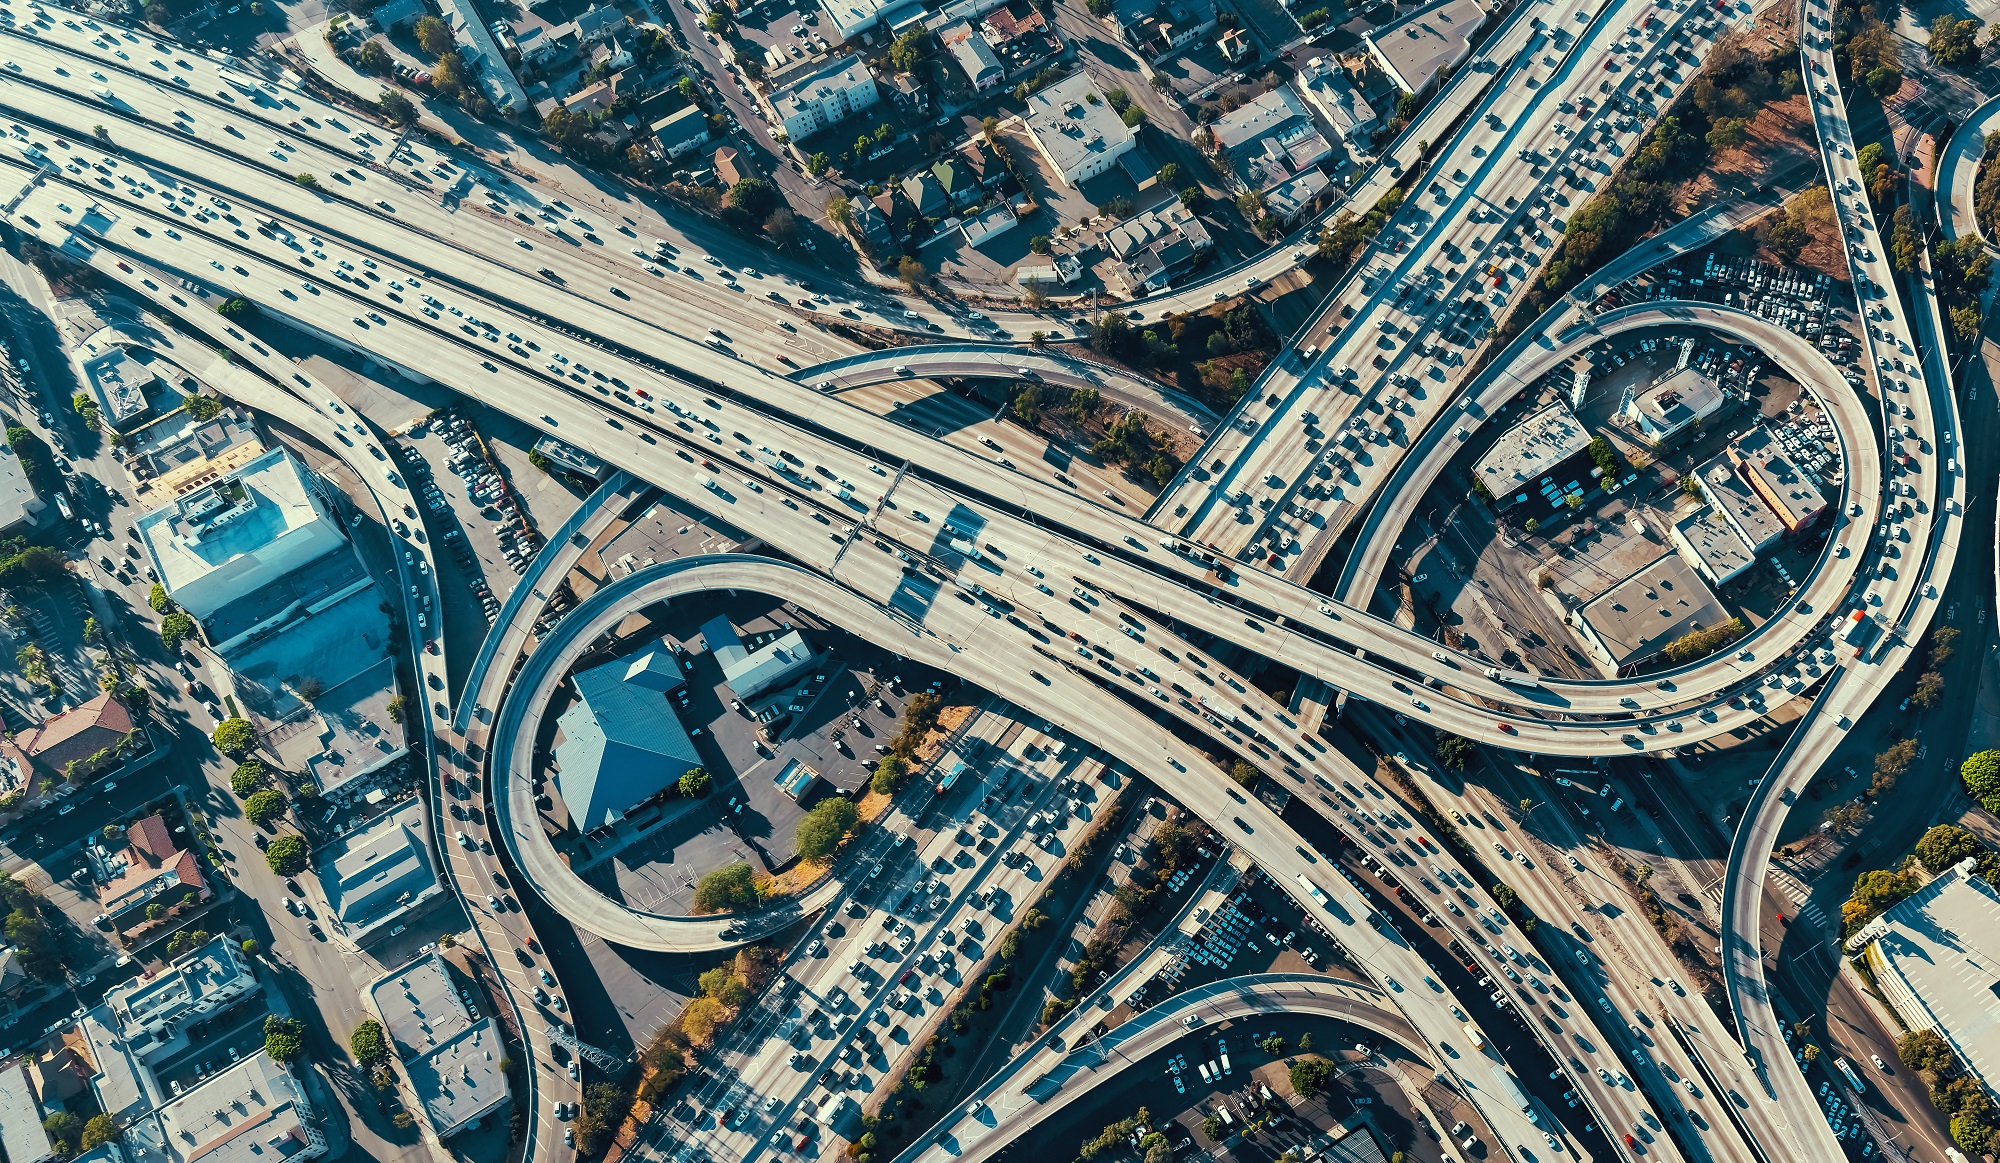 Aerial view of a massive highway intersection in Los Angeles, California.